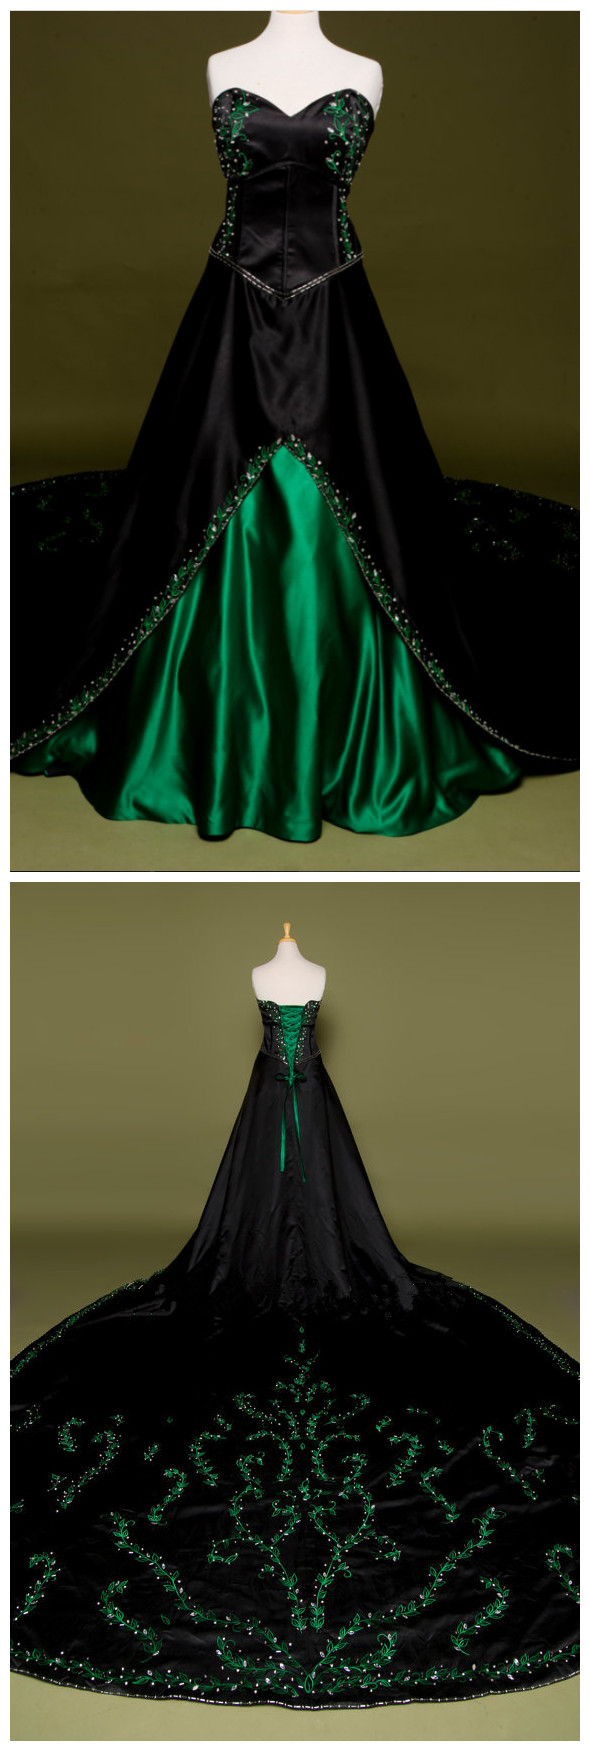 Gothic Victorian Black Wedding Dress With Green Embroidery Long Stain Bridal Gown Lace Up Back Vestidos De Noiva